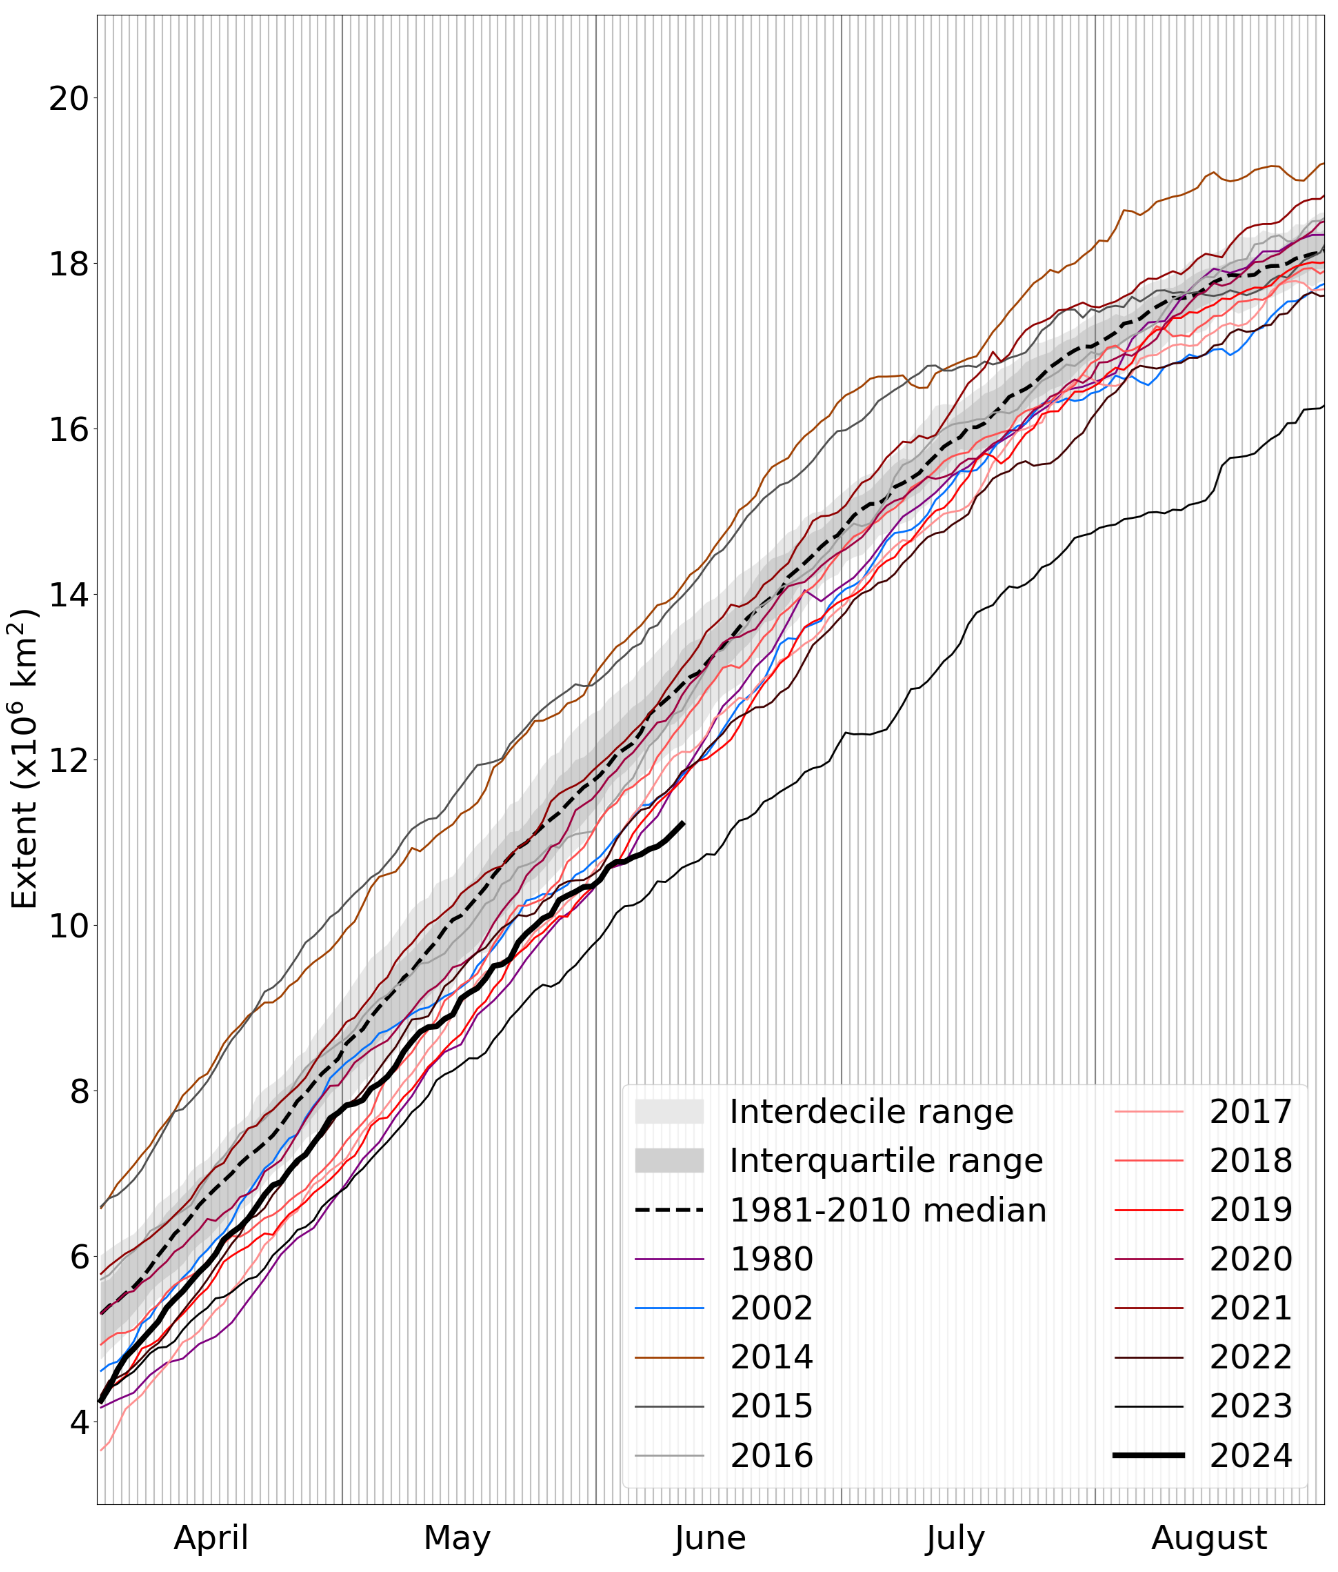 Daily Antarctic sea ice extent for 2024, compared with recent years and the low ice years of 1980, 1986 and 2002. Also shown is the 1981-2010 average with interquartile and interdecile ranges shown by the shaded areas. Data are from the National Snow and Ice Data Center (NSIDC).